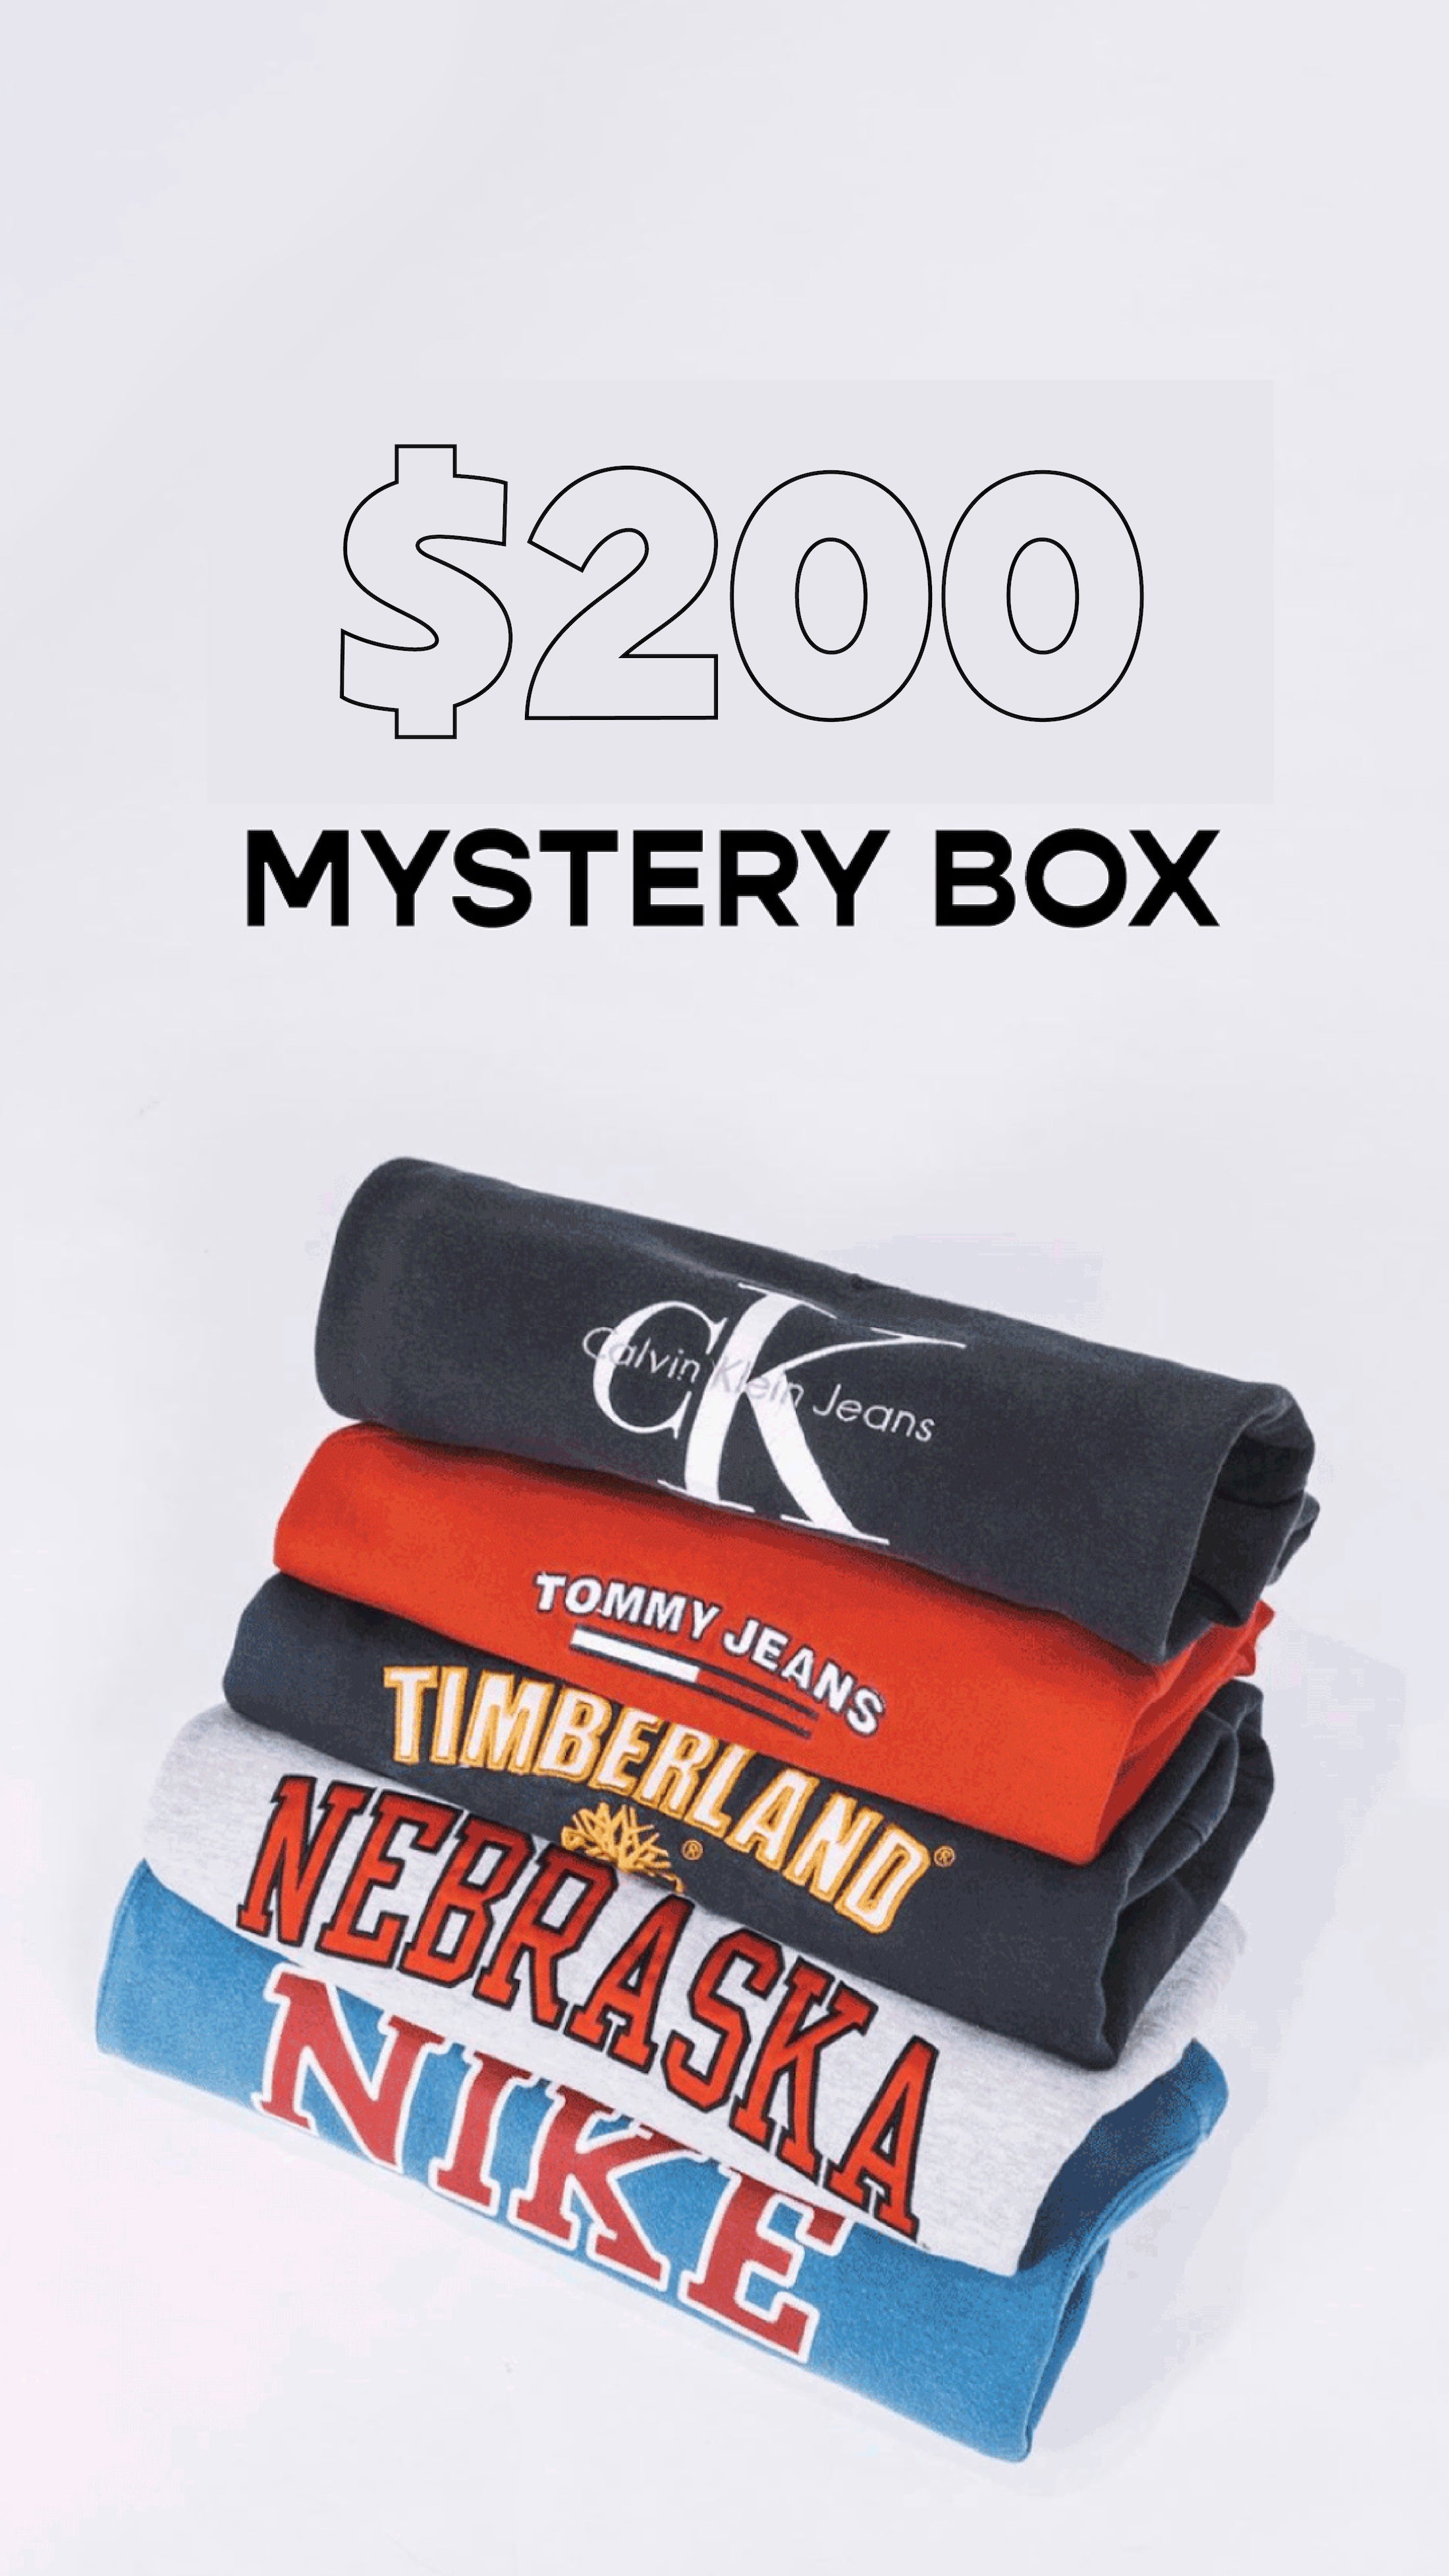 RESTATED VINTAGE $200 MYSTERY BOX